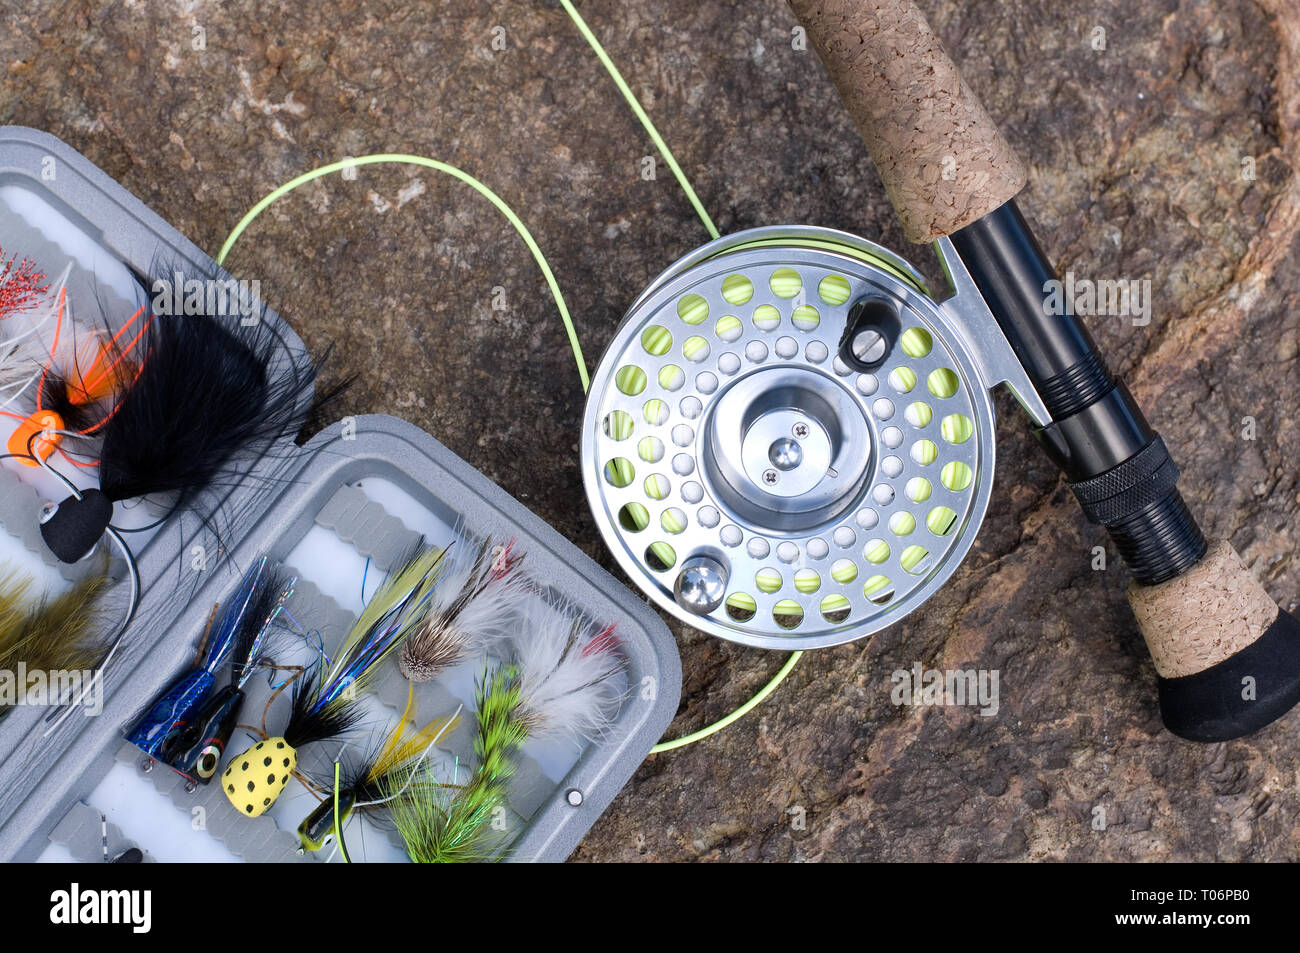 https://c8.alamy.com/comp/T06PB0/beautiful-fly-fishing-reel-with-flies-in-a-tackle-box-on-a-rock-T06PB0.jpg